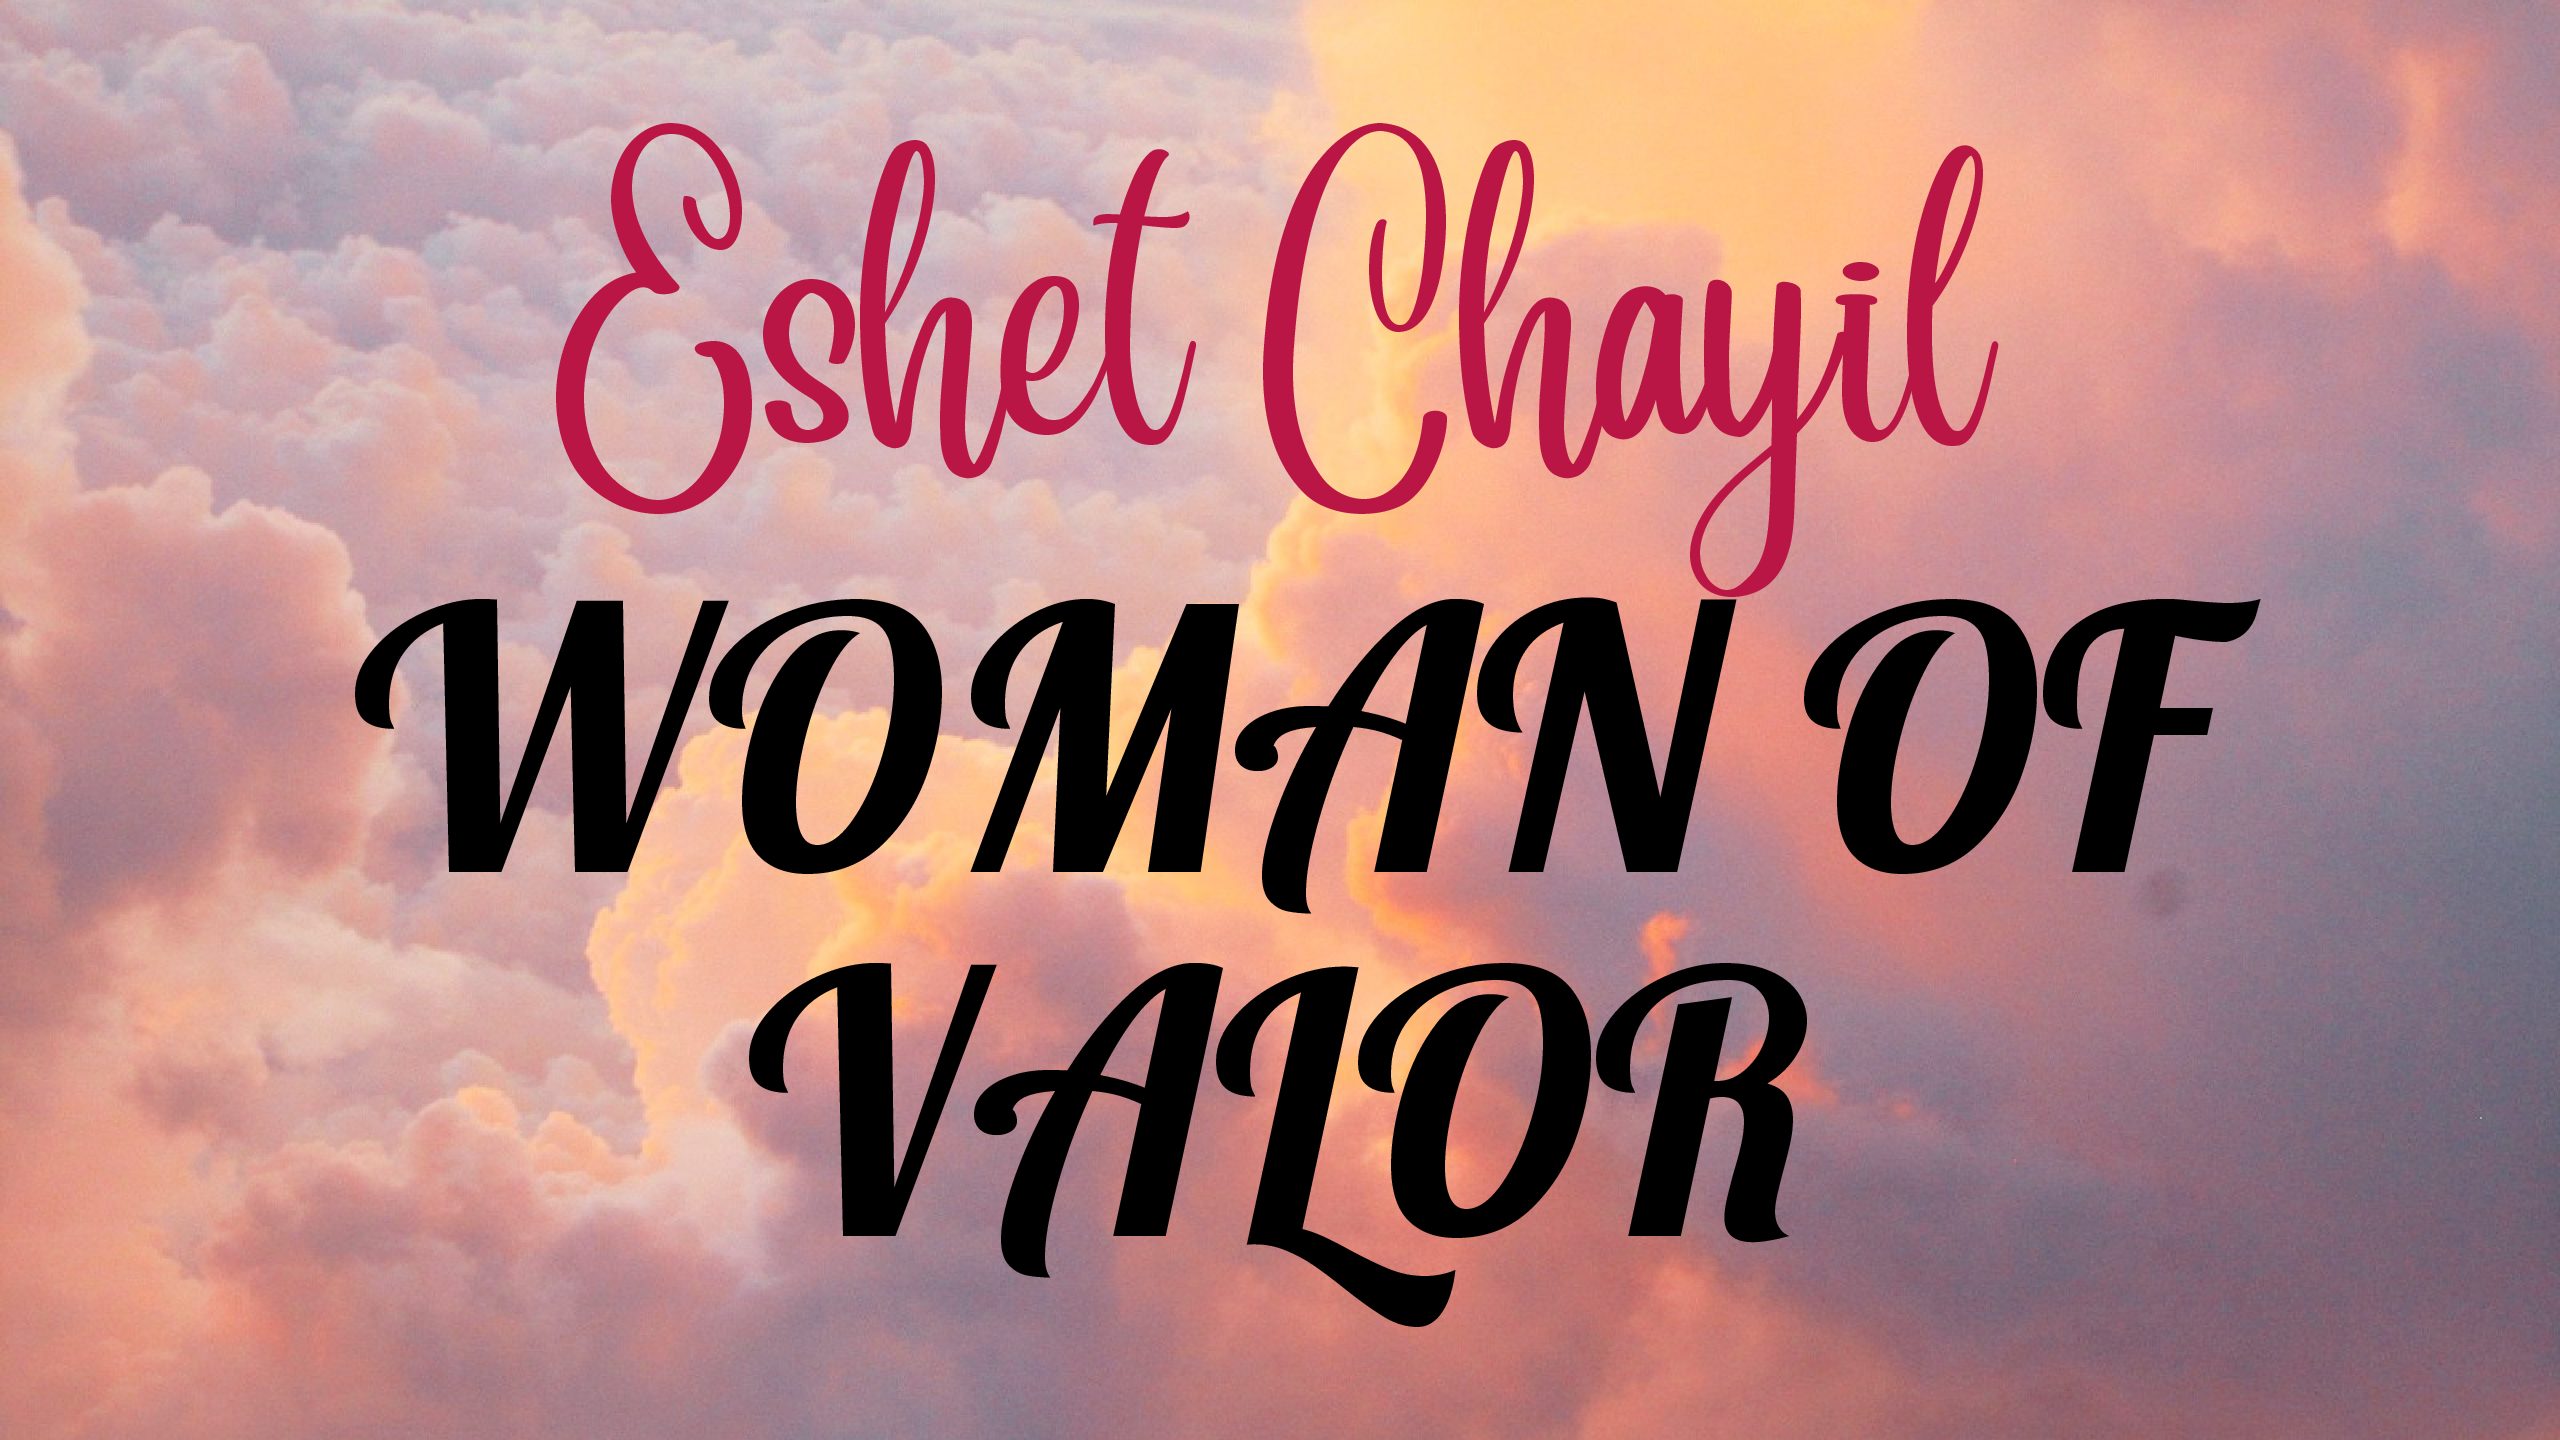 A Woman of Valor